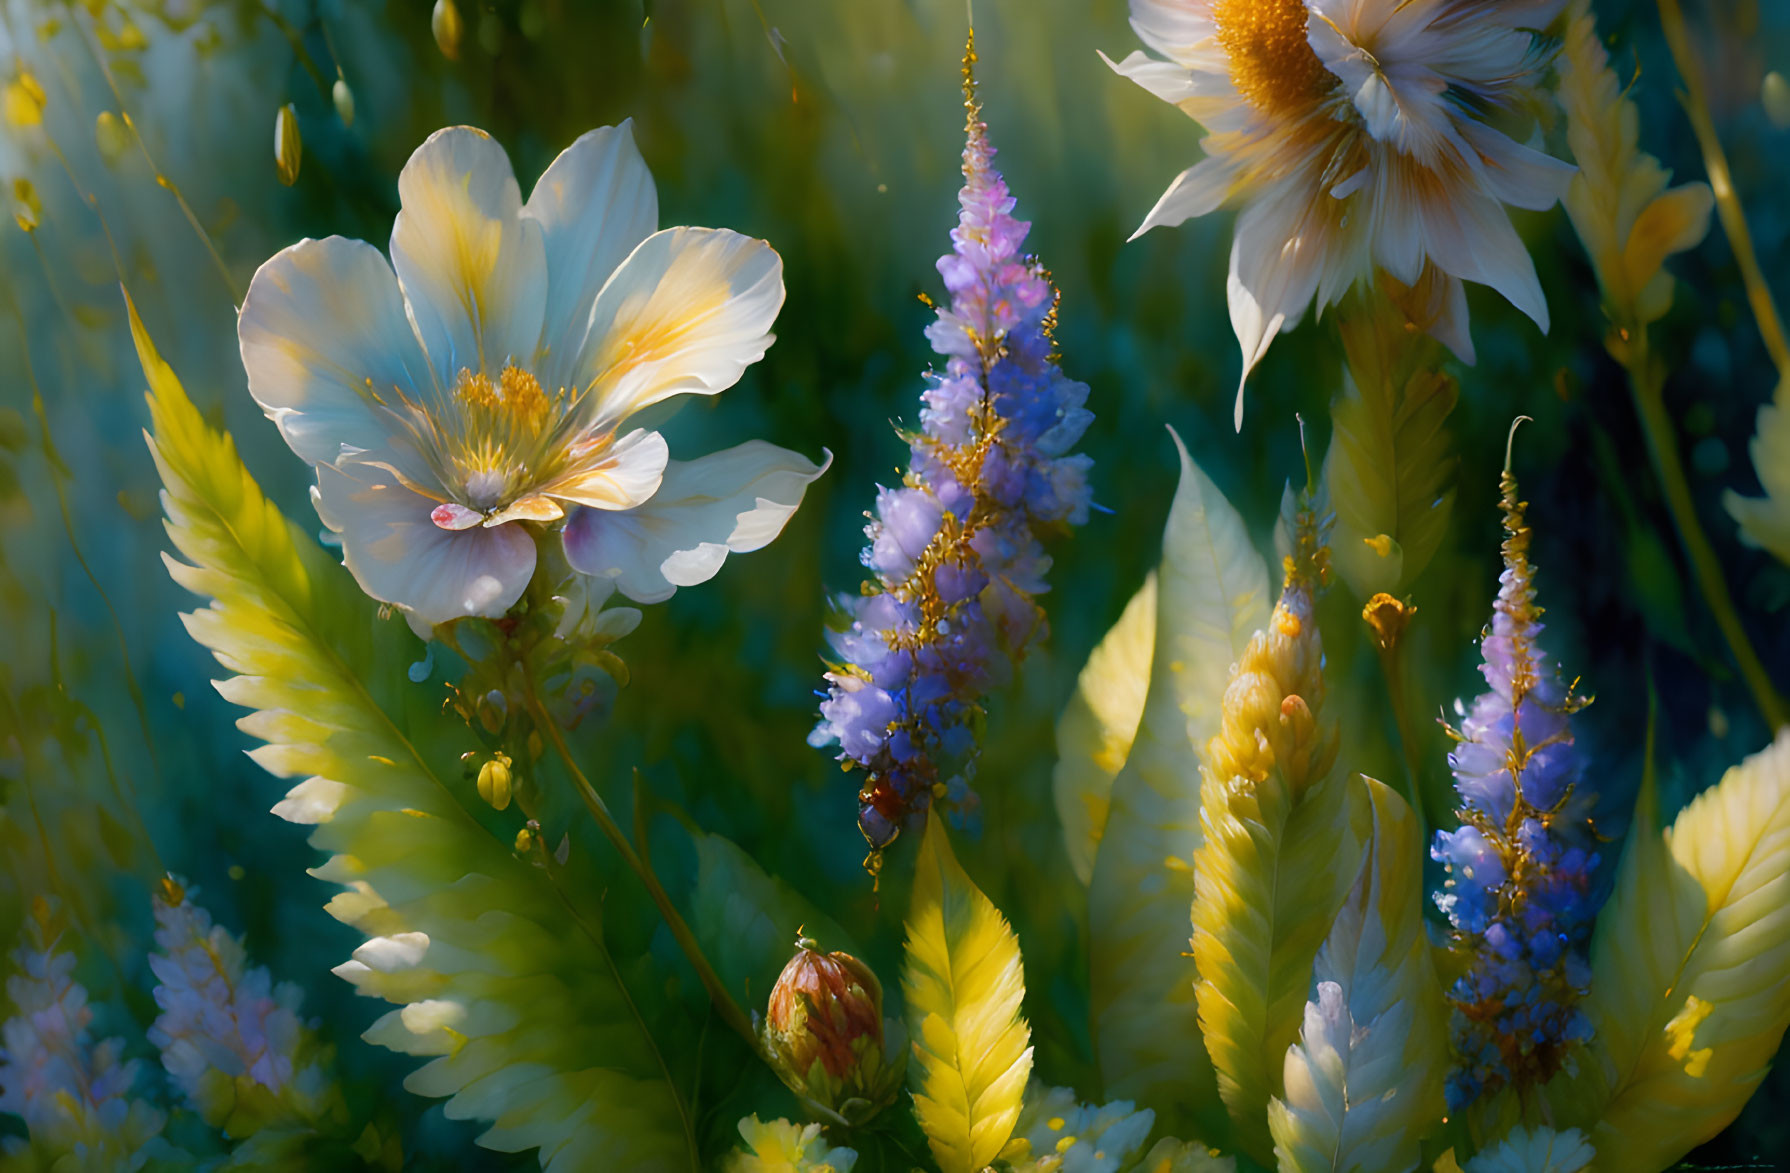 Colorful Floral Scene with White and Yellow Blossoms in Soft Light